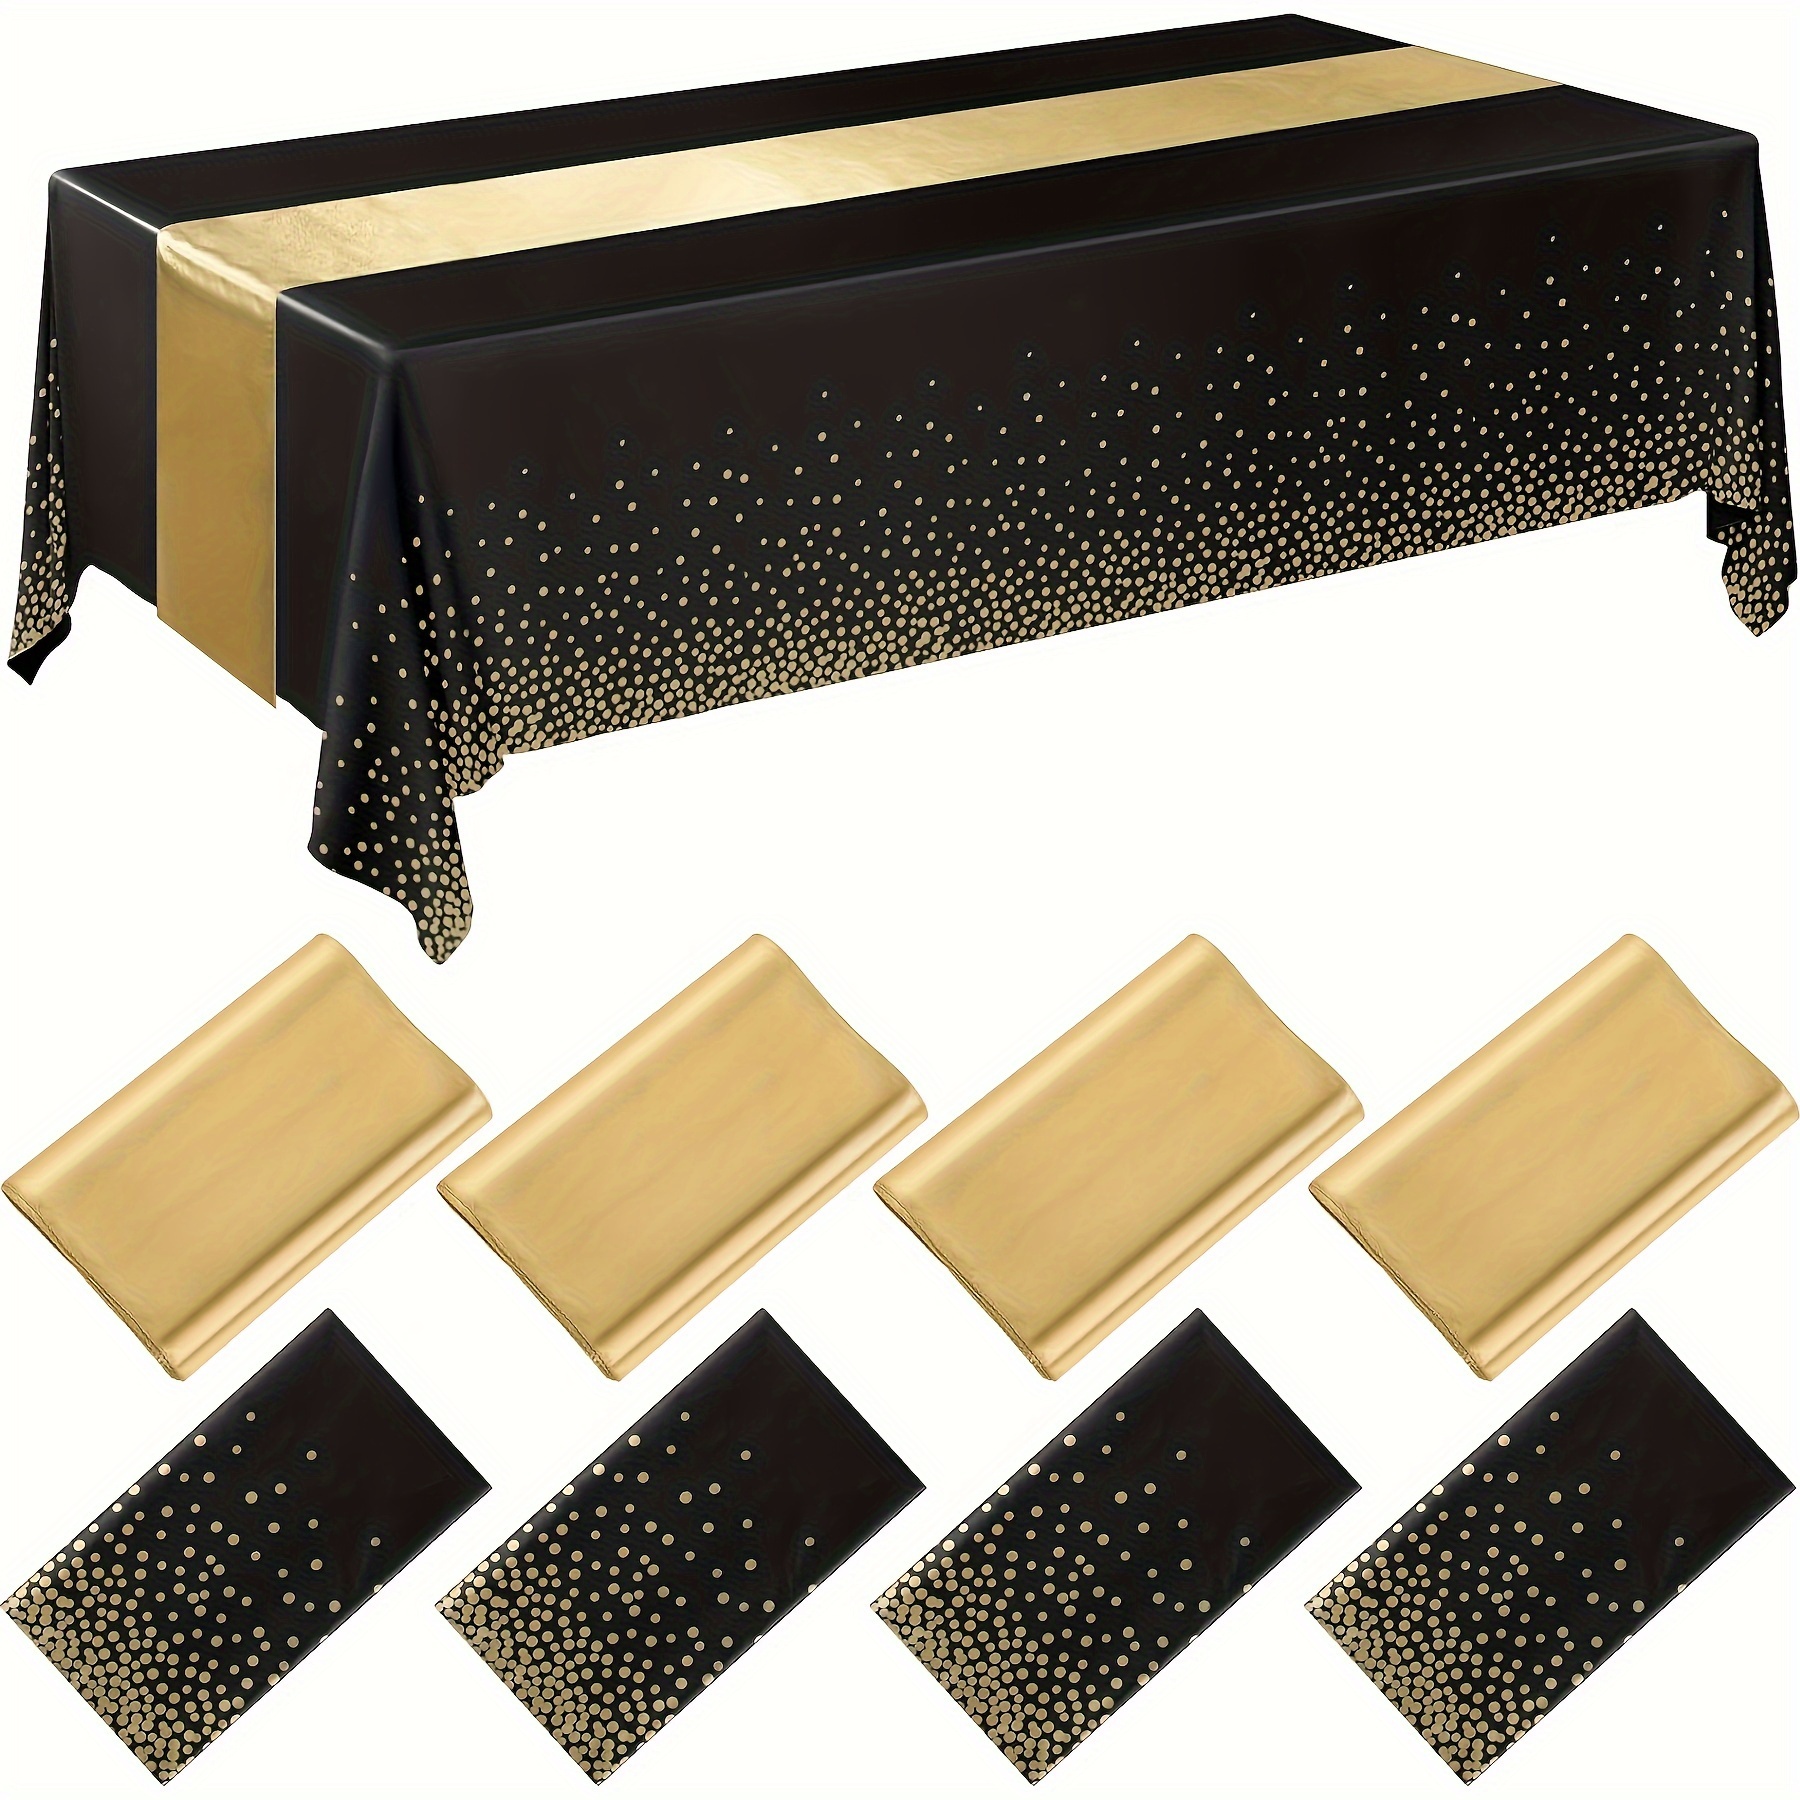 

Elegant 8-piece Black & Gold Disposable Tablecloth Set - Perfect For Weddings, Birthdays & Parties